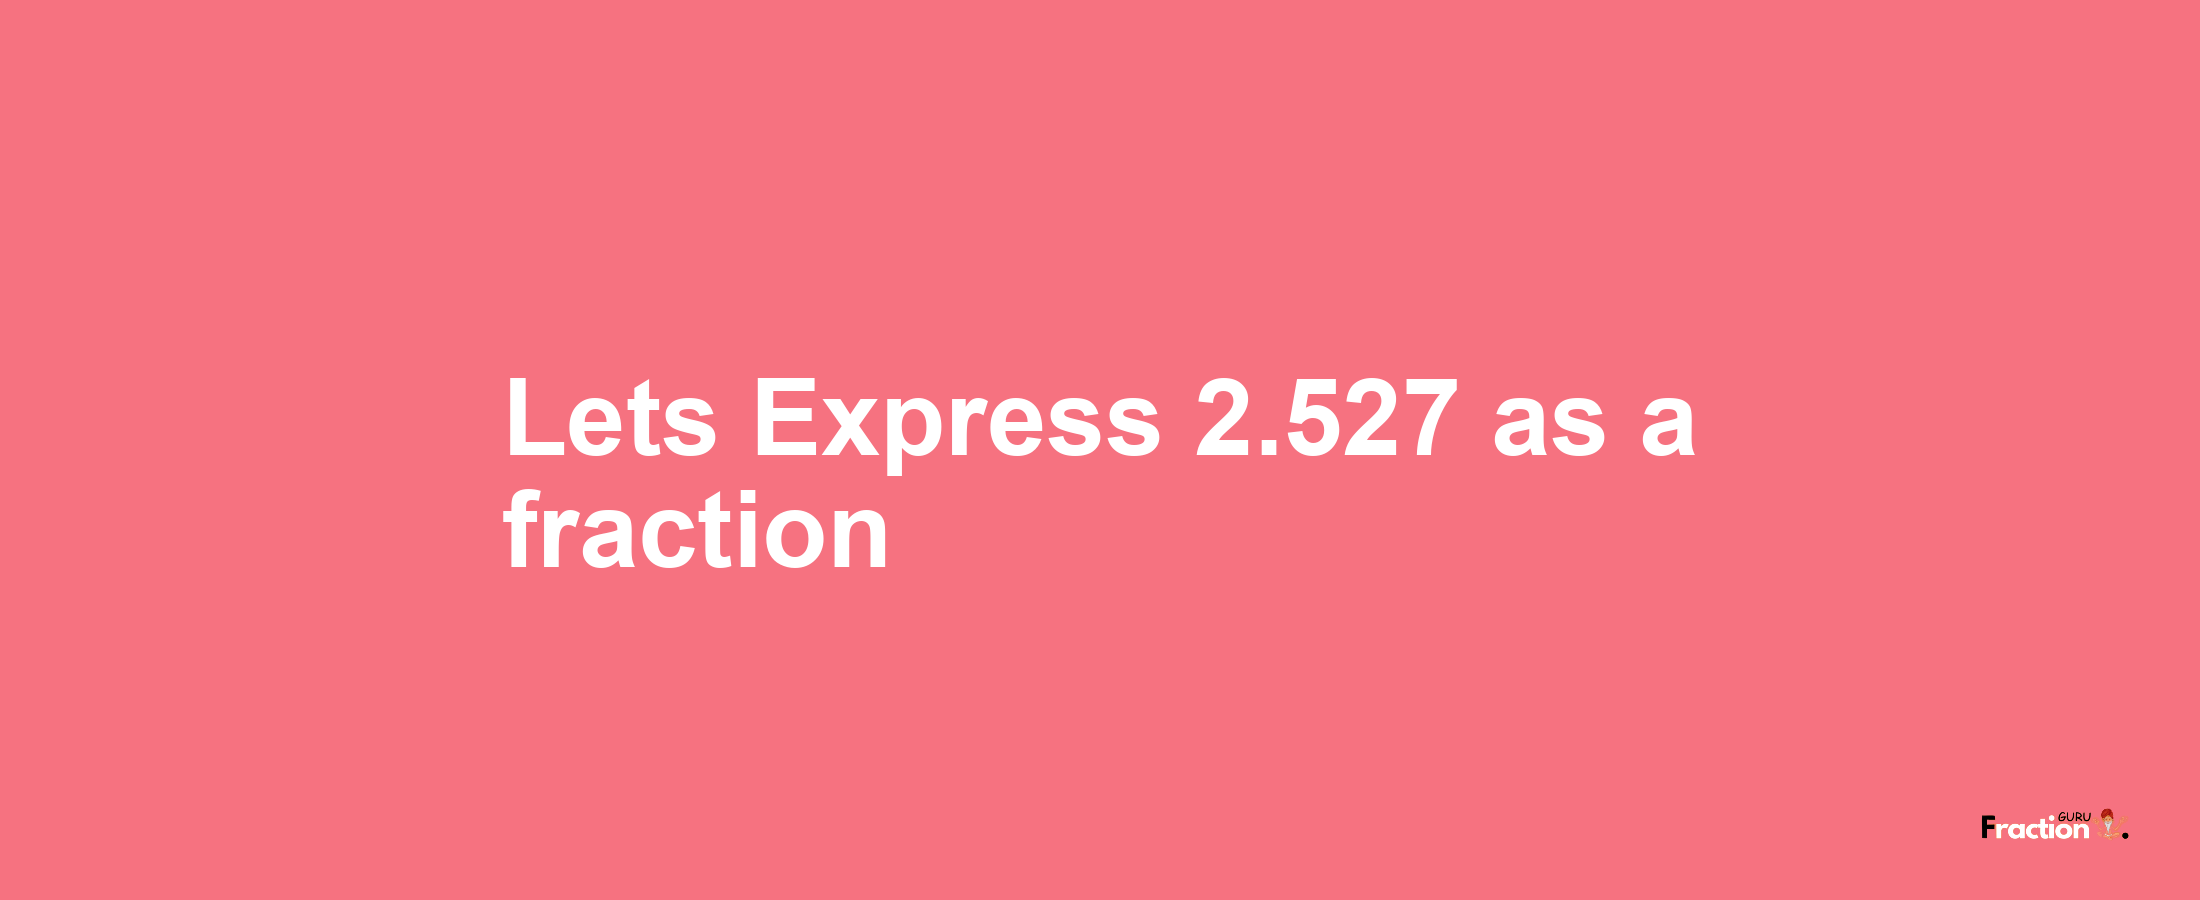 Lets Express 2.527 as afraction